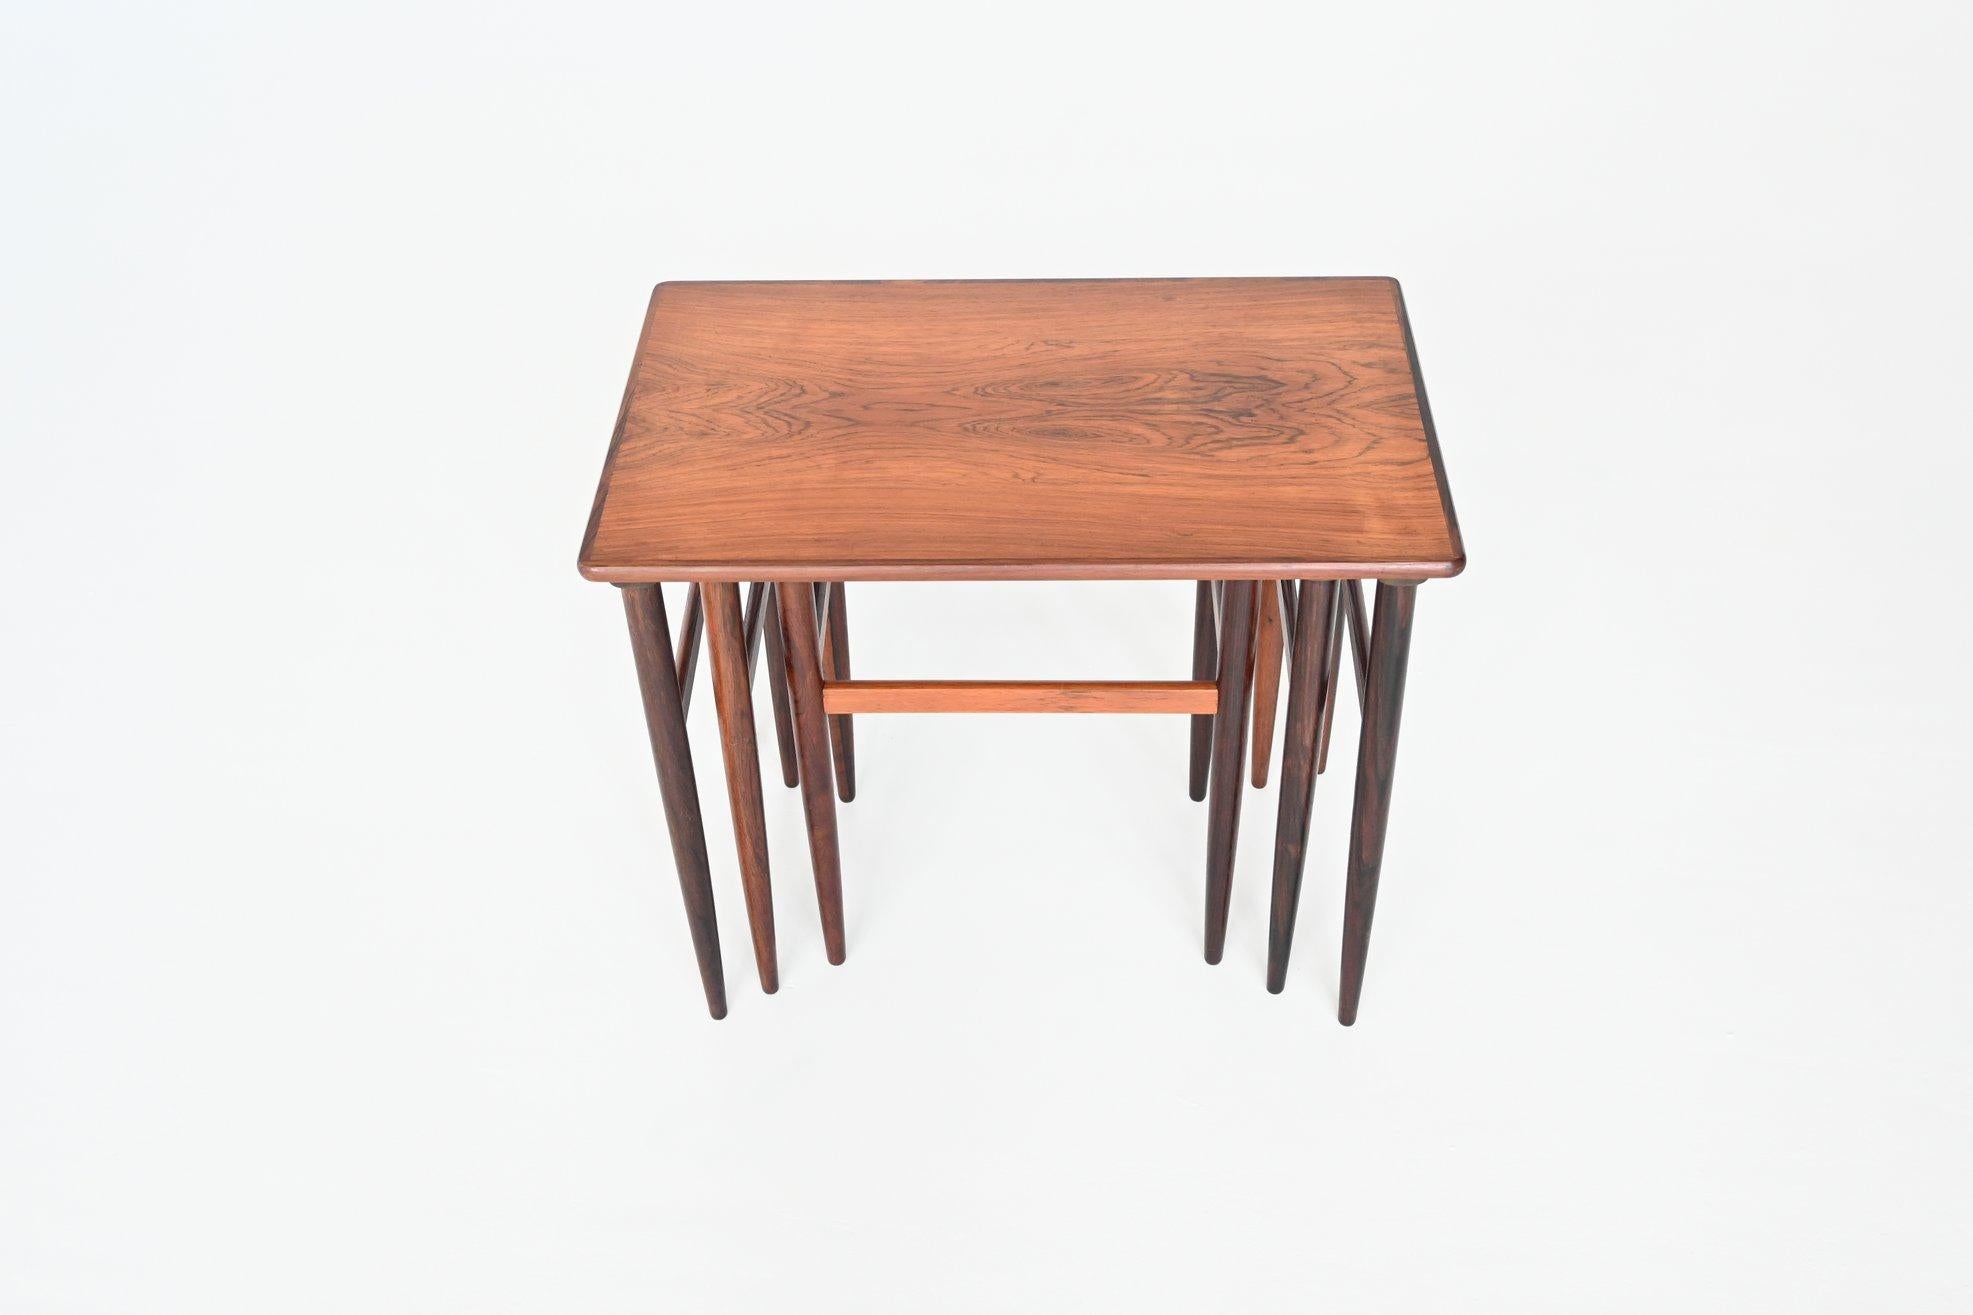 Beautiful shaped set of three nesting tables designed by Arne Hovmand Olsen, Denmark 1960. This set of nesting tables is made of very nice grained rosewood. They give a minimalist look due to the slender legs. Highly decorative set of nesting tables